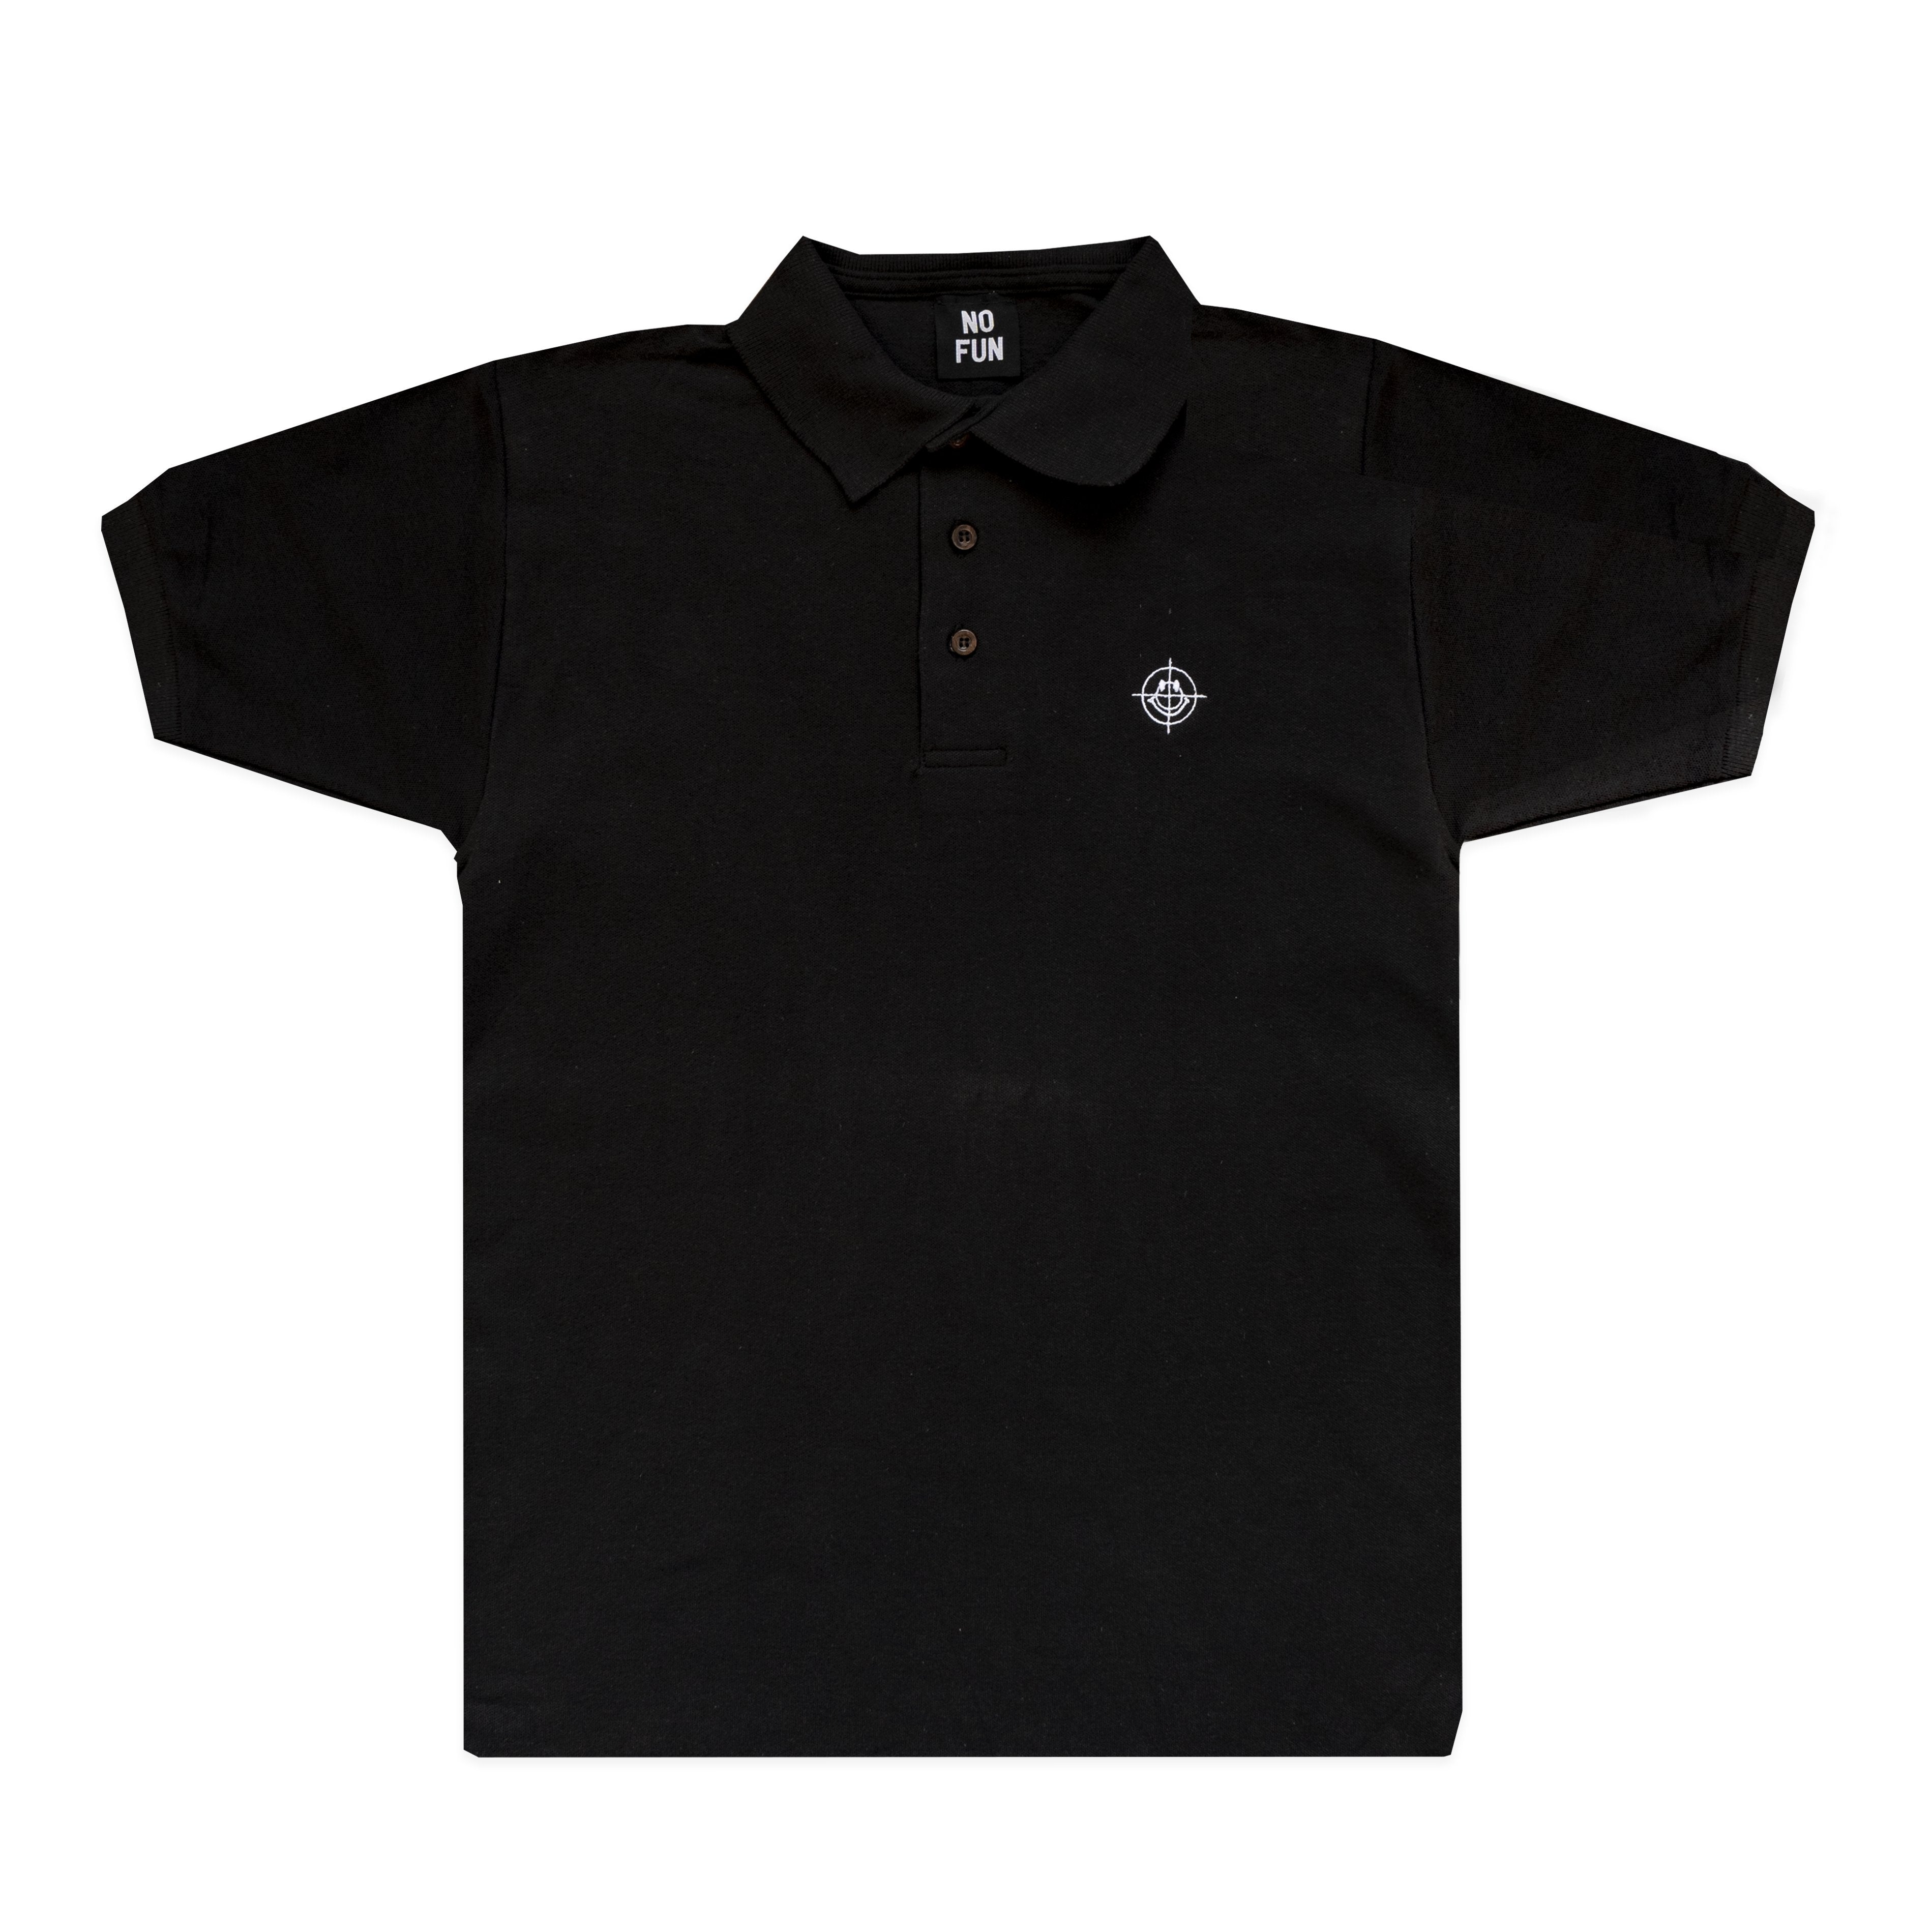 Black polo shirt with small embroidered "Target" logo from No Fun®. Embroidery is of a smiley face in a crosshair, sized 1.25" diameter.